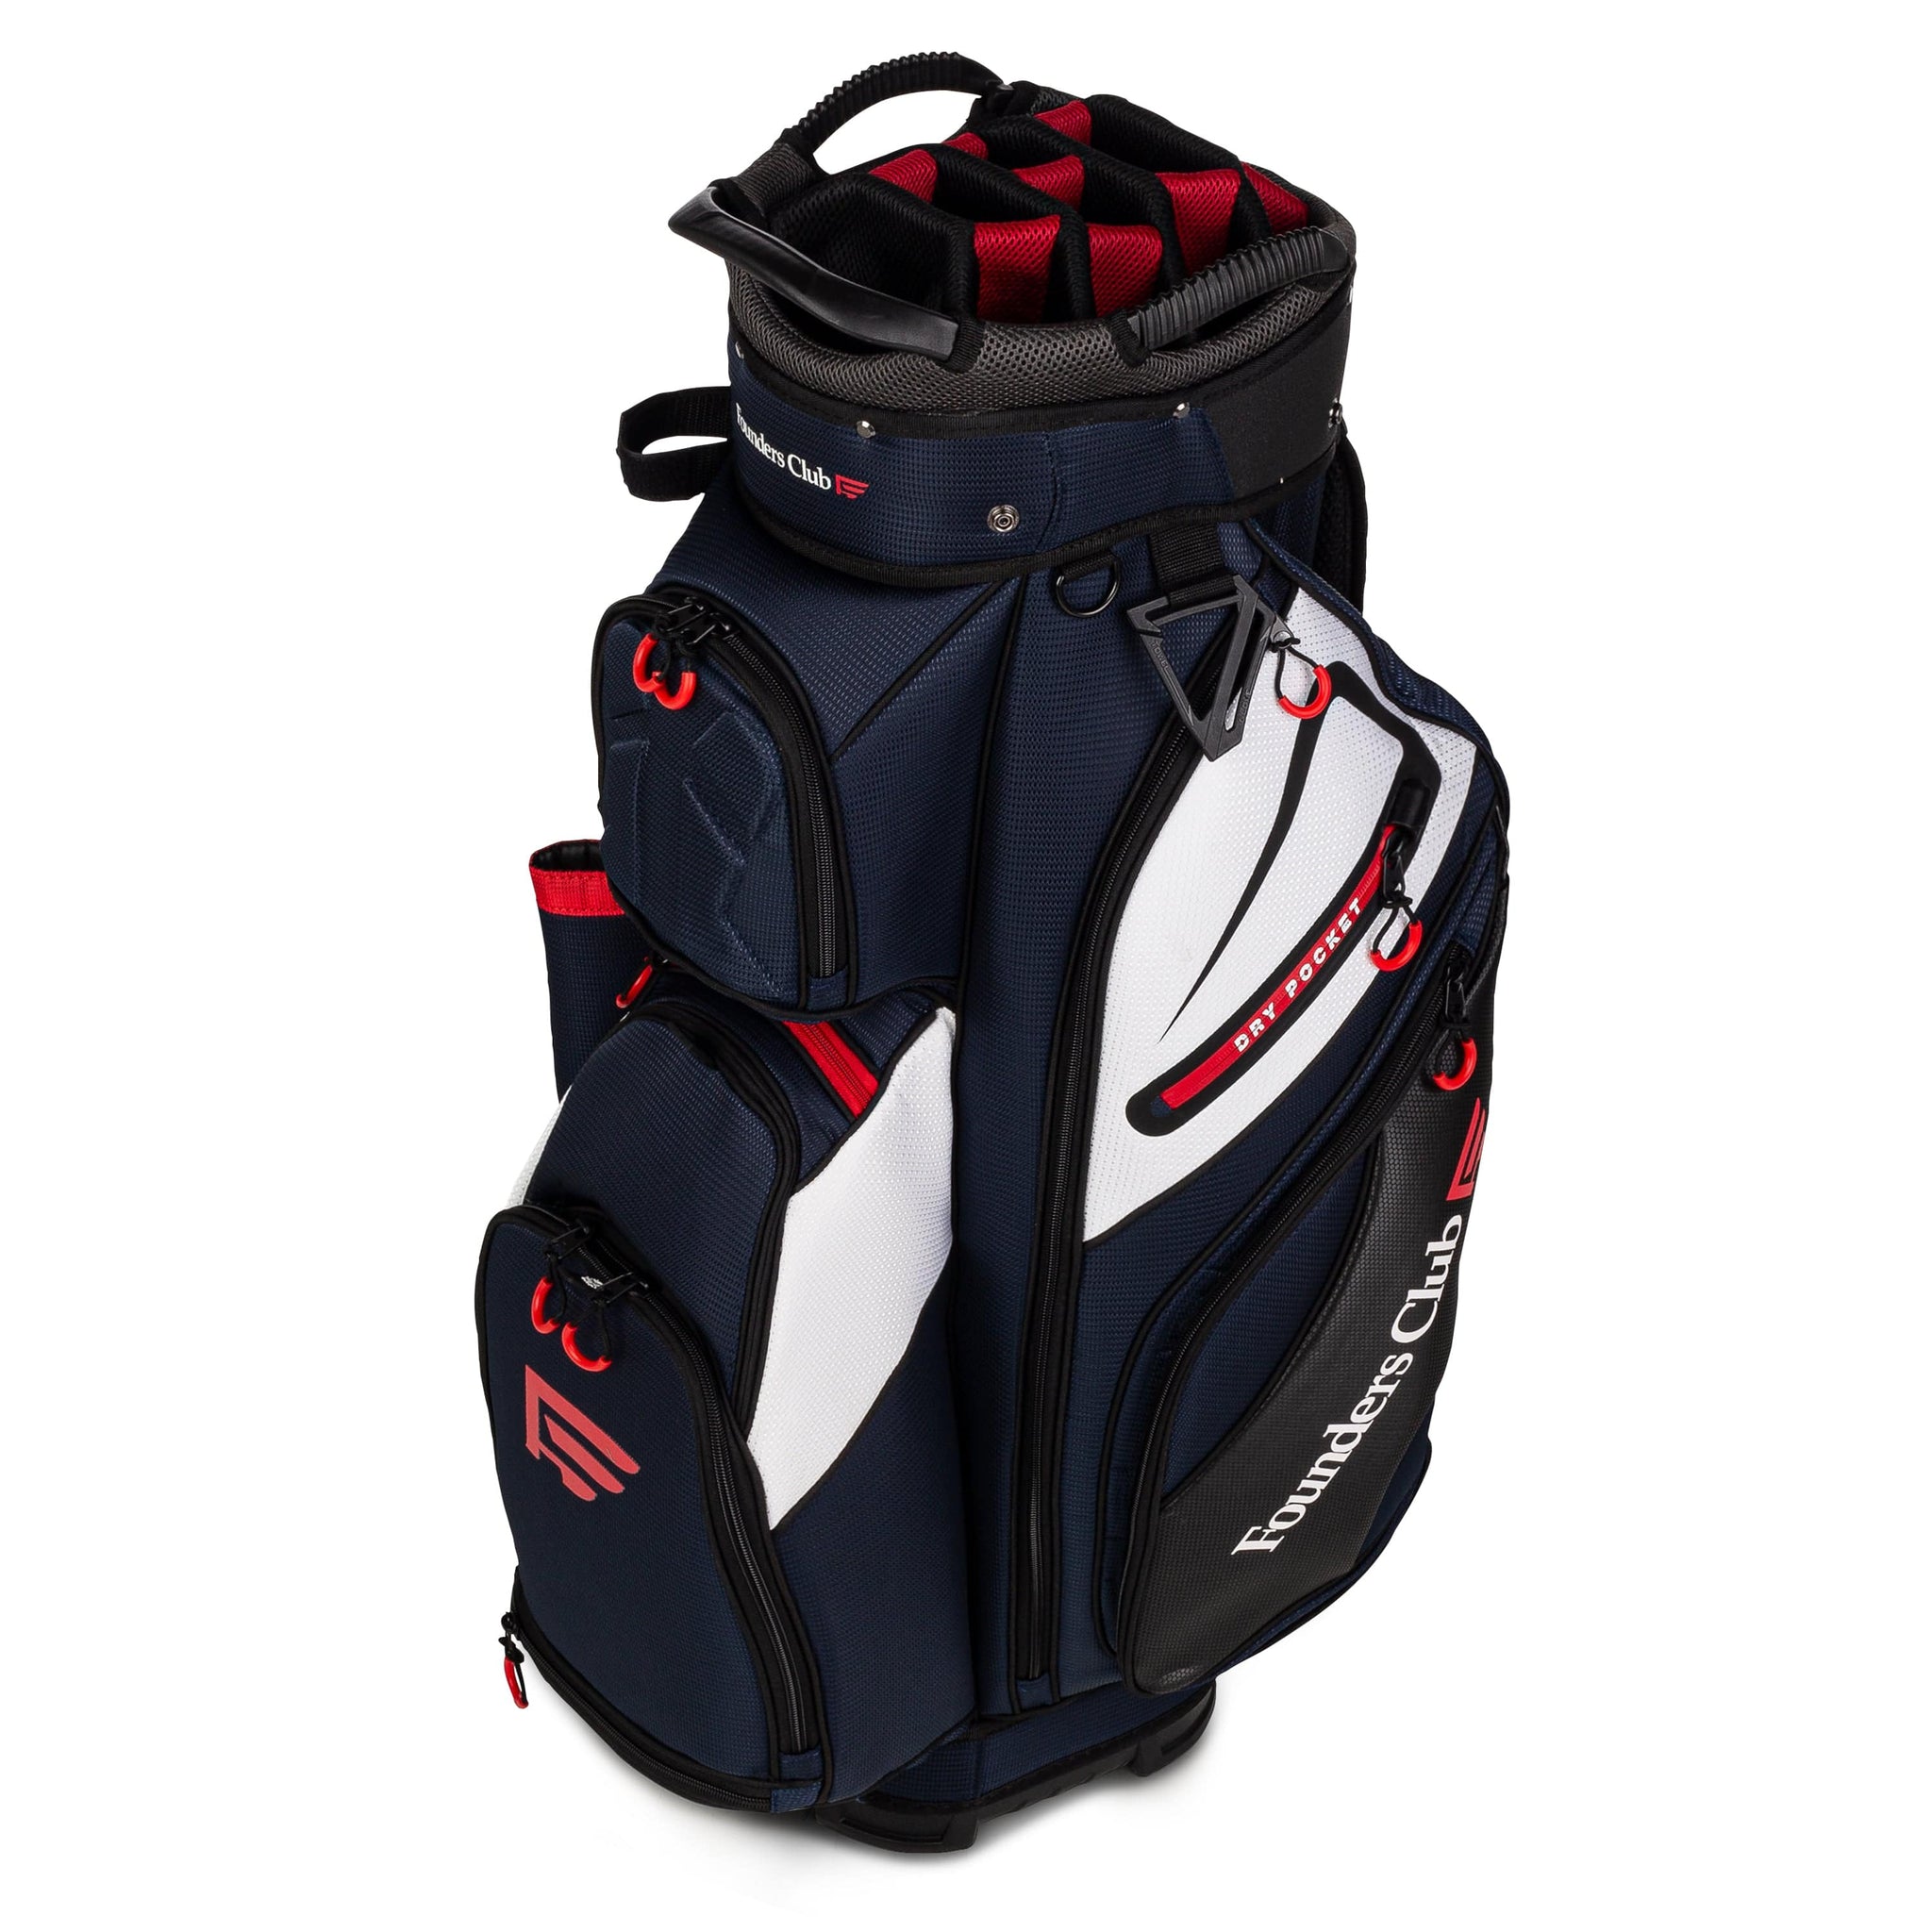 Ask Echo Lightweight Golf Stand Bag with 14 Way Full Length Dividers ,9  Pockets , External Putter Tube with Rain Cover - Walmart.com